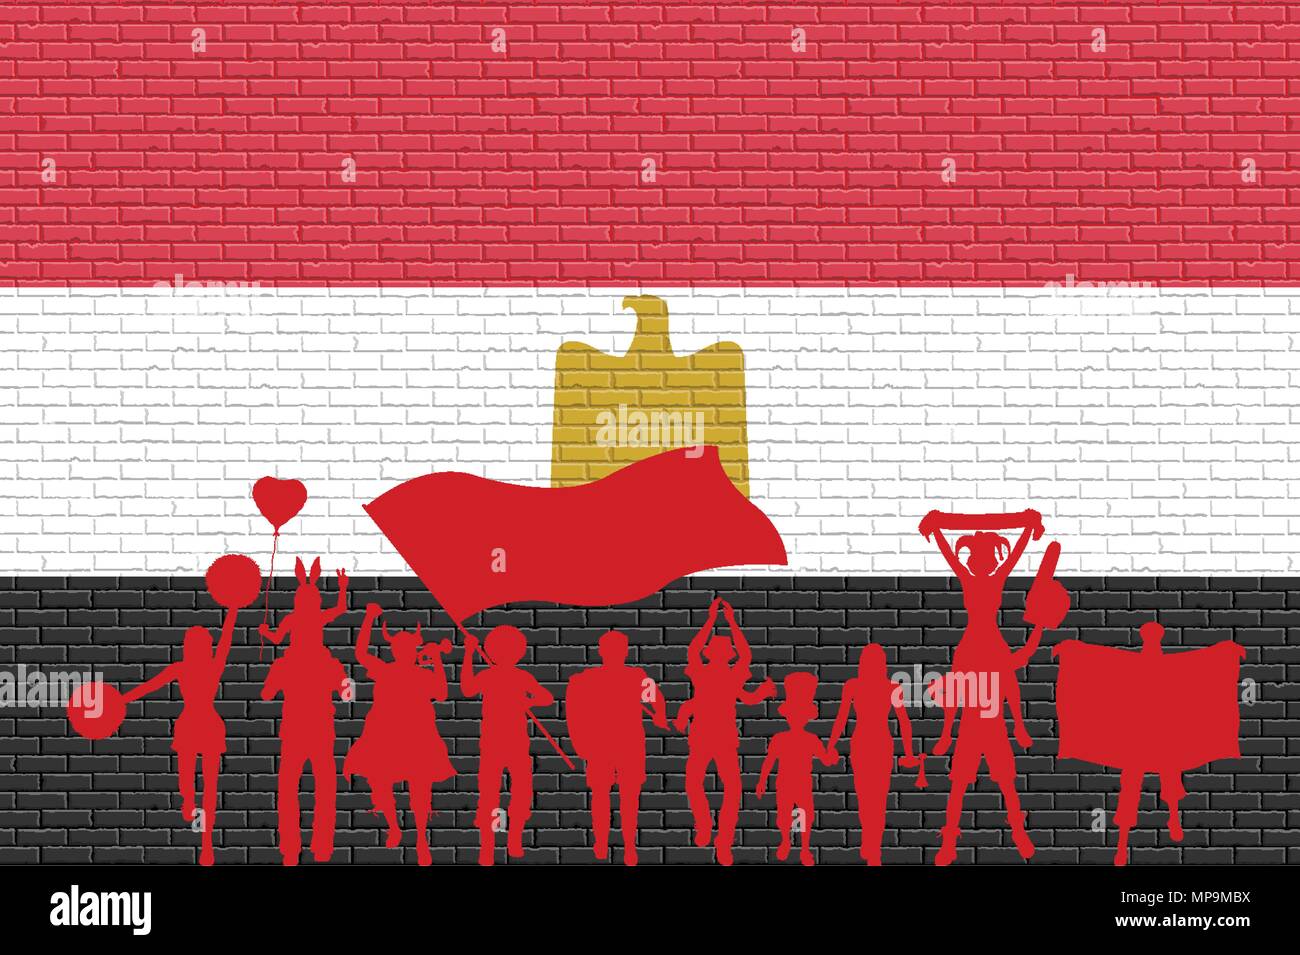 Egyptian supporter silhouette in front of brick wall with Egypt flag. All the objects, silhouettes and the brick wall are in different layers. Stock Vector